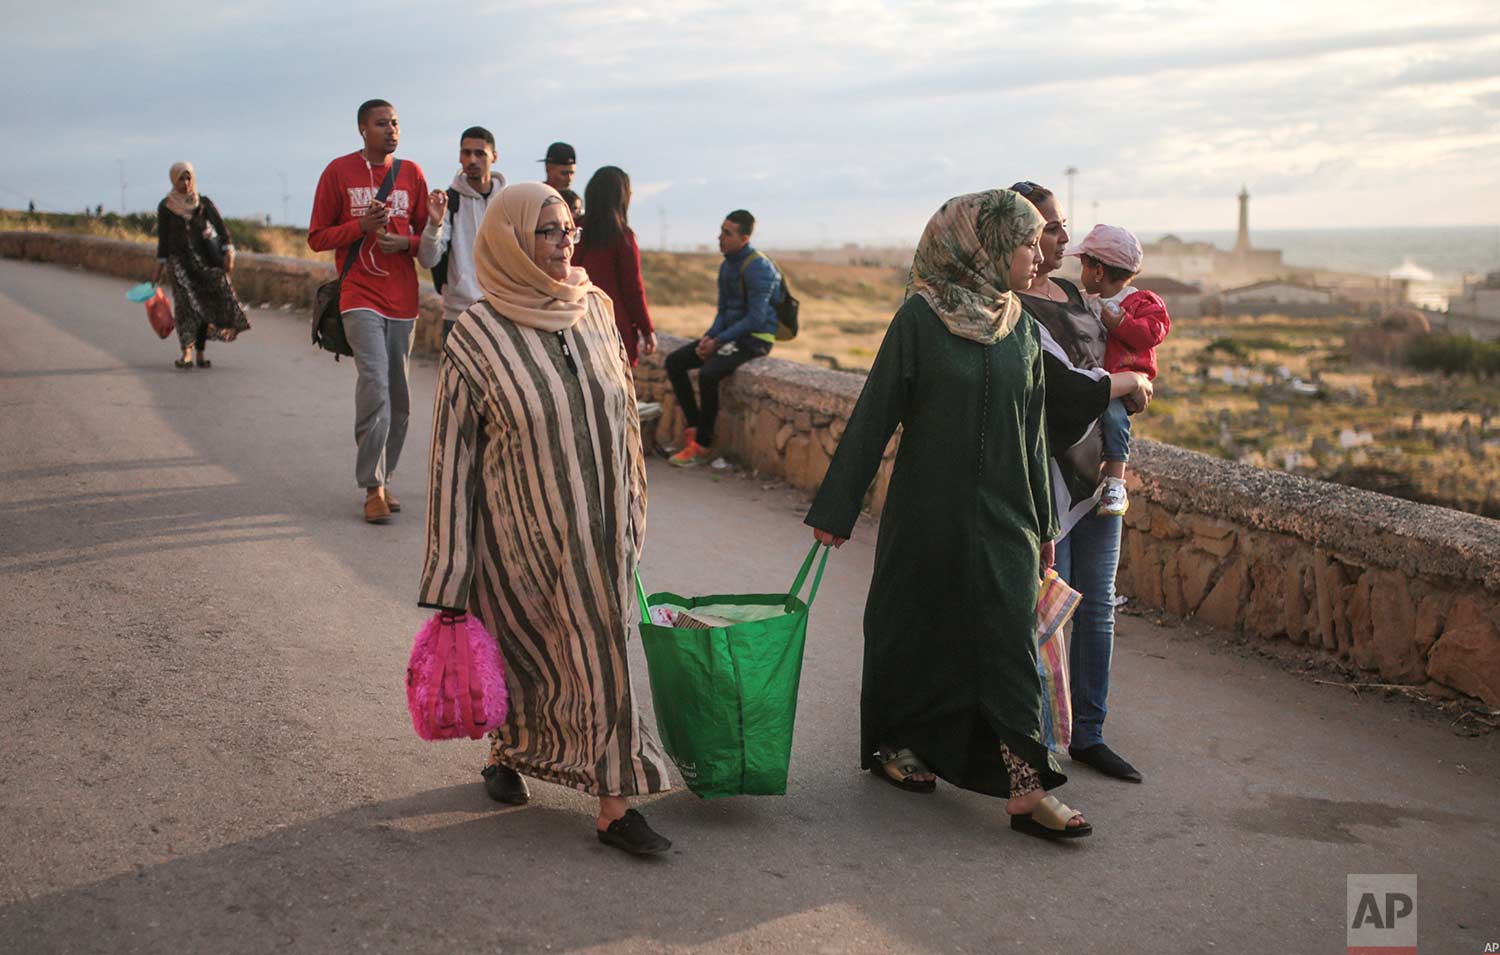  People carry bags of food as they arrive to break their fast in the holy month of Ramadan, on Rabat beach, Morocco, Saturday, June 9, 2018. (AP Photo/Mosa'ab Elshamy) 